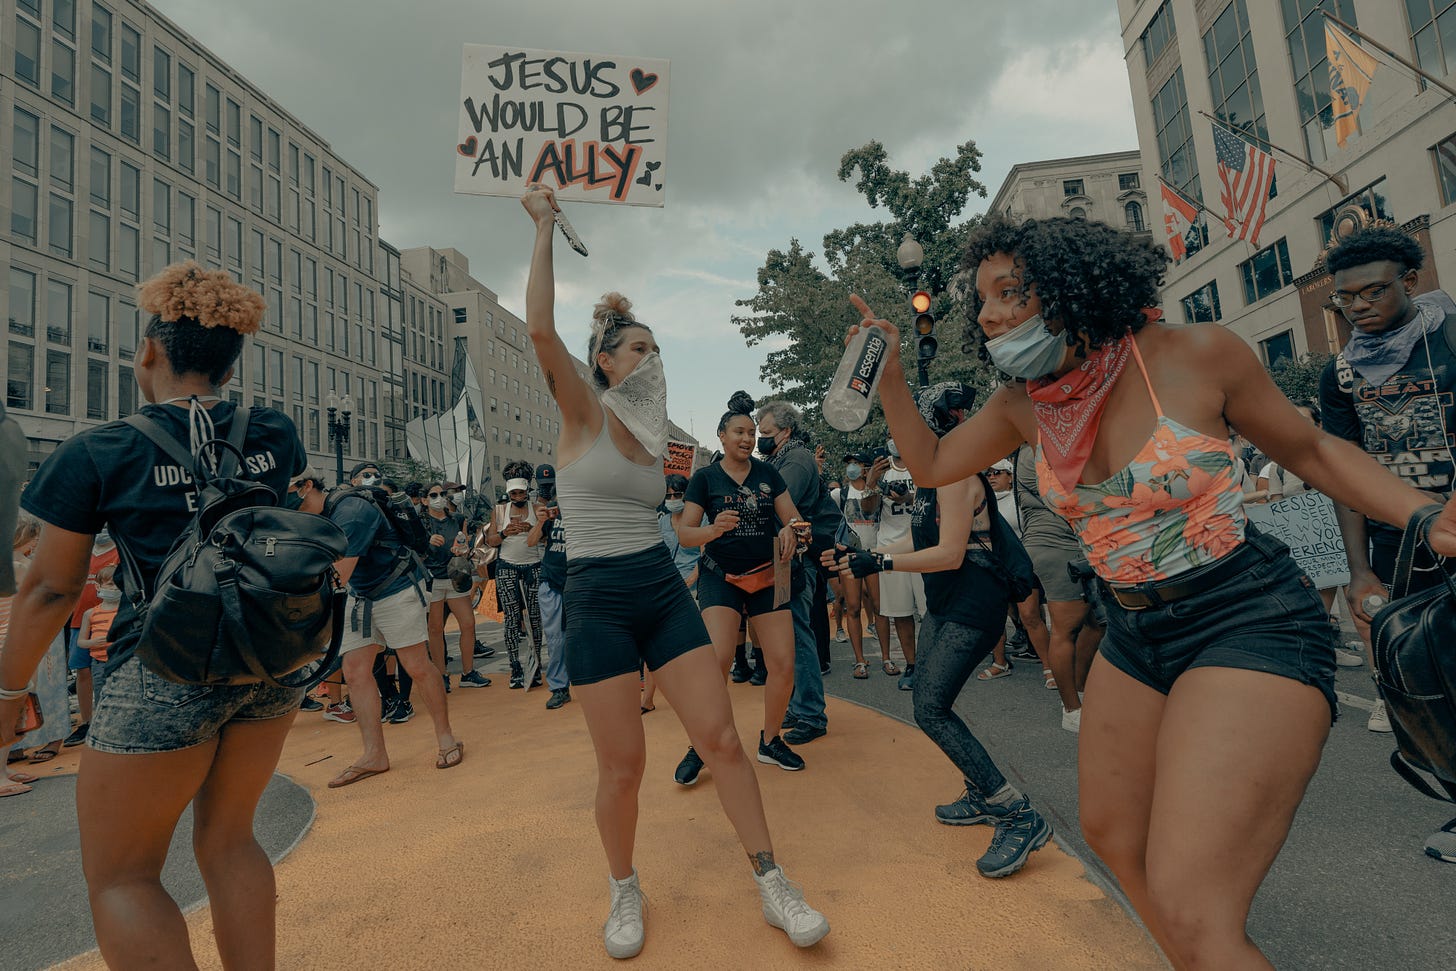 young people dancing at a protest, one is holding a sign that says "Jesus would be an ally"